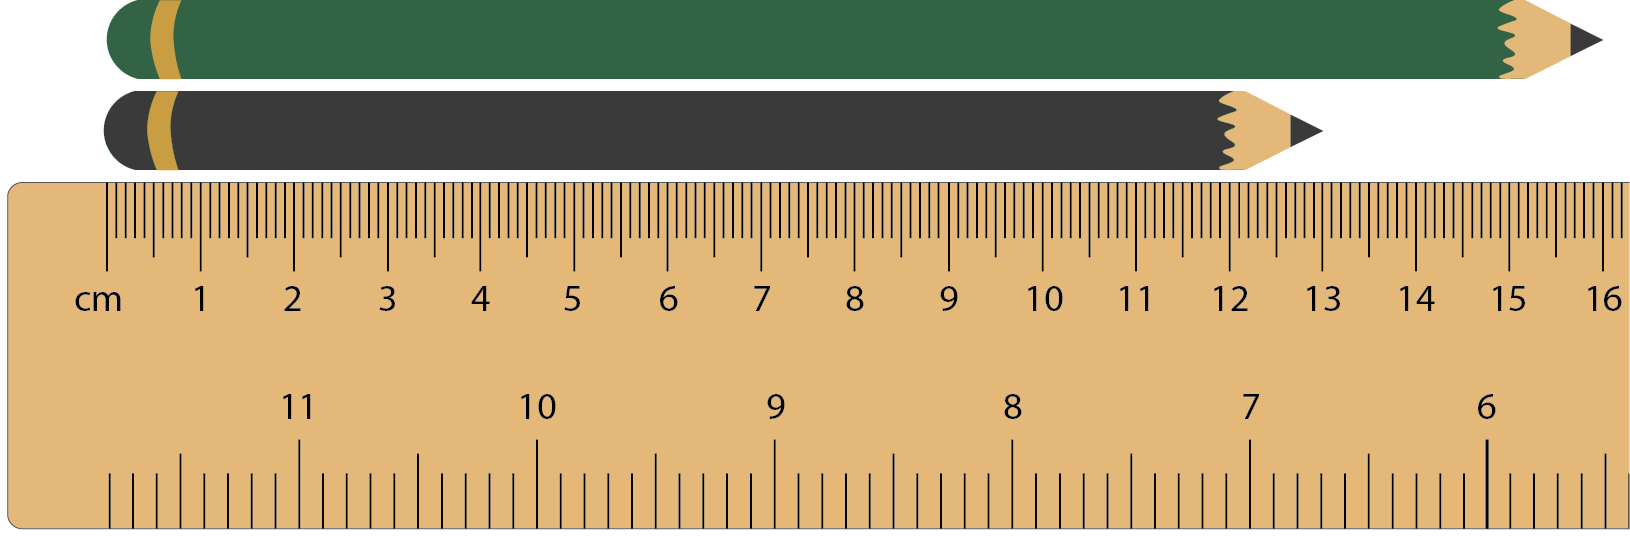 Image of two pencils aligned against a ruler.